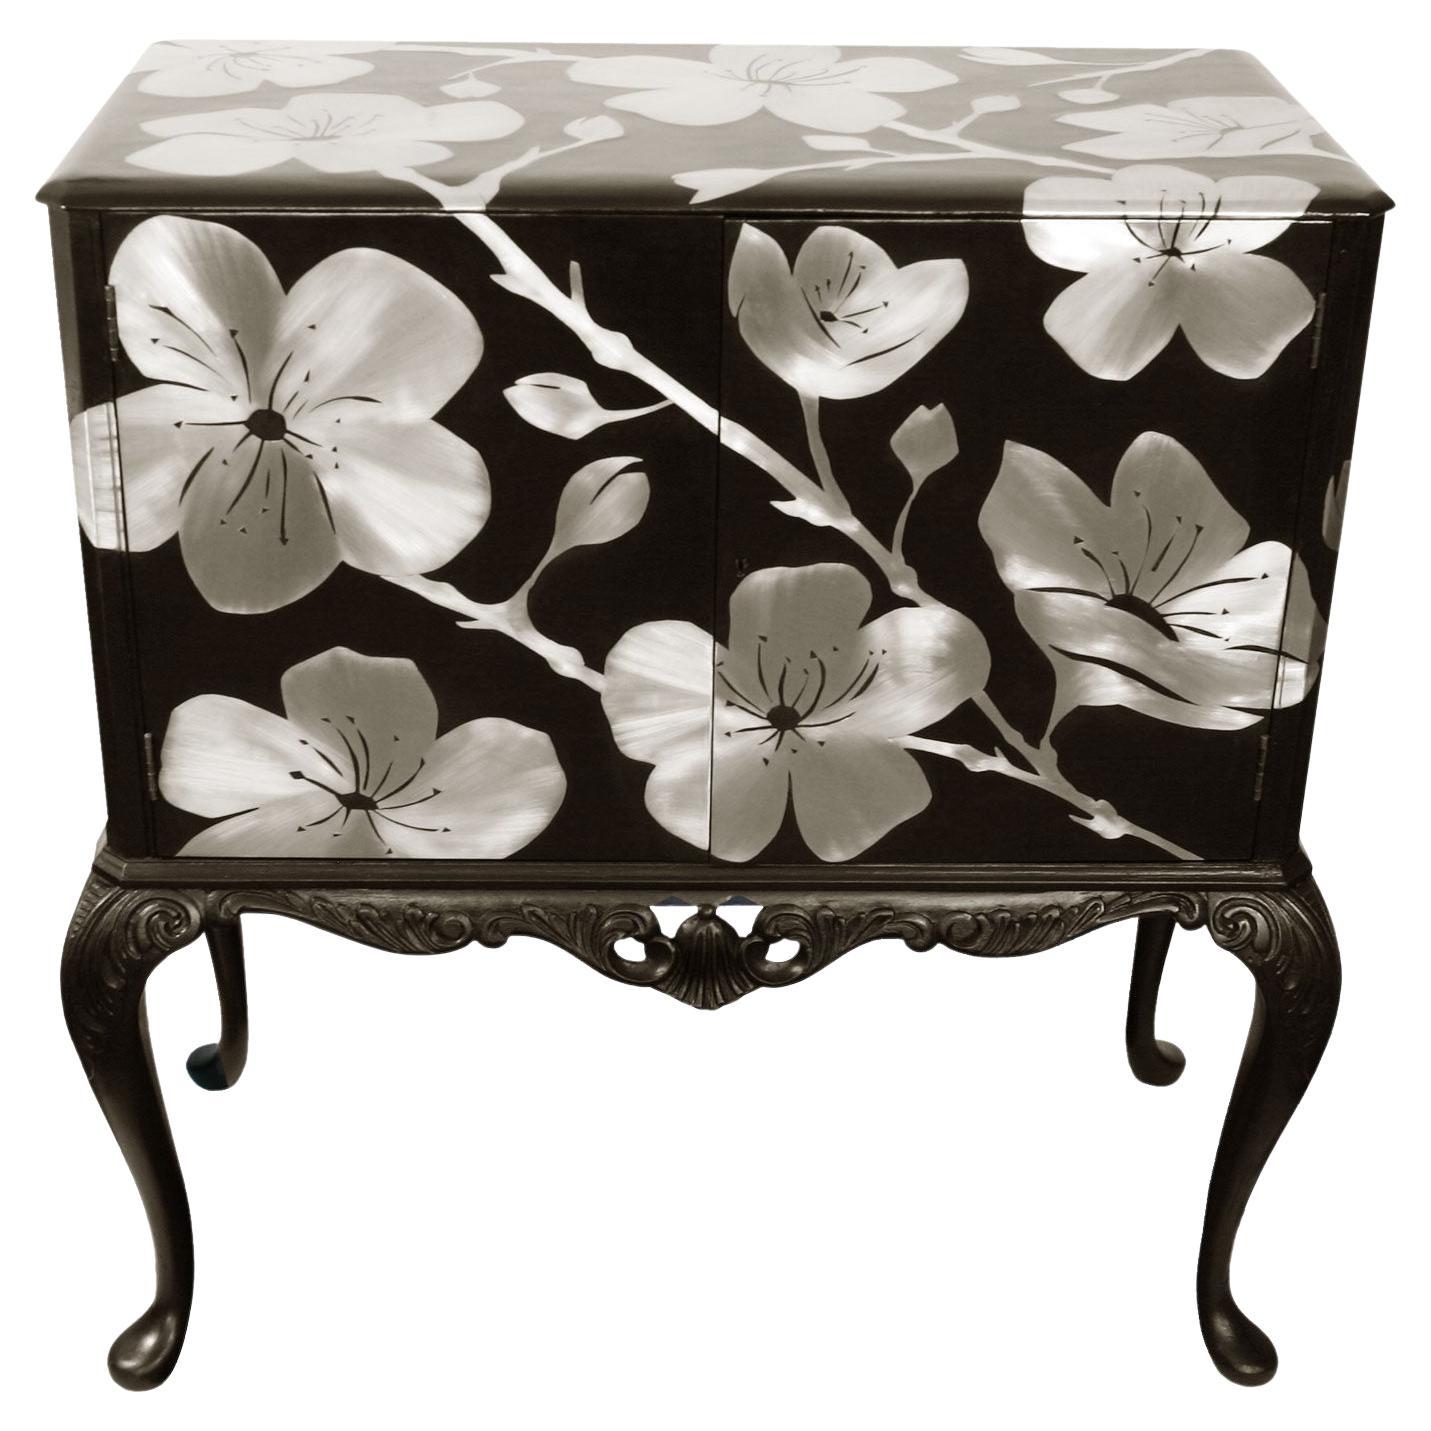 Kate Noakes 'Cherry Blossom' Cabinet